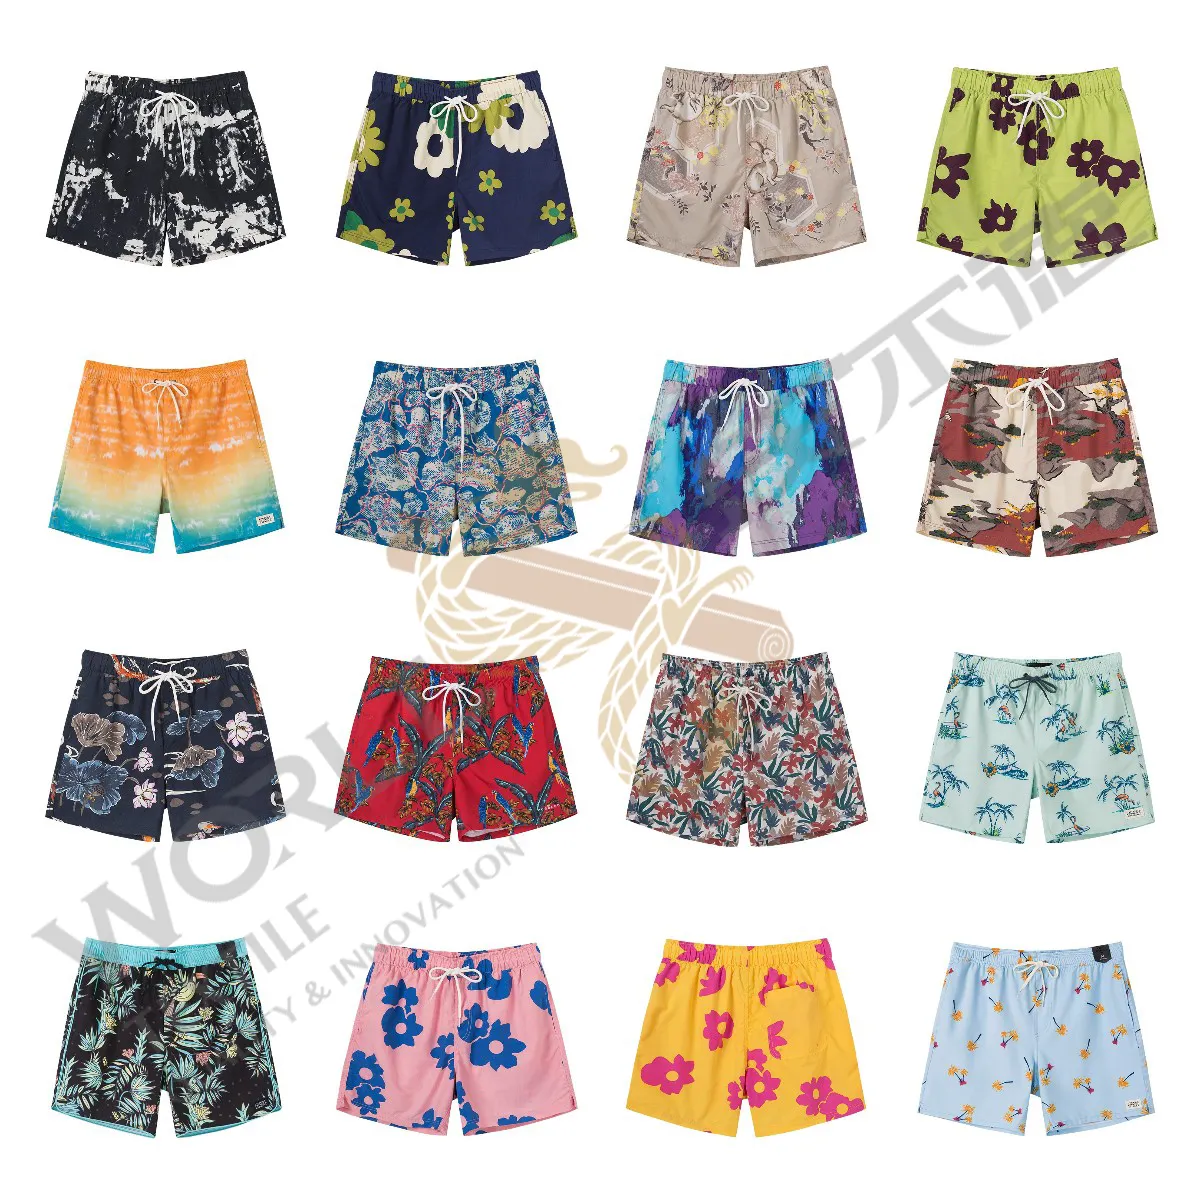 Men's Shorts Customized 1 Piece Casual Other Fabric Digital Printing Woven Short Board Shorts Swim Trunks